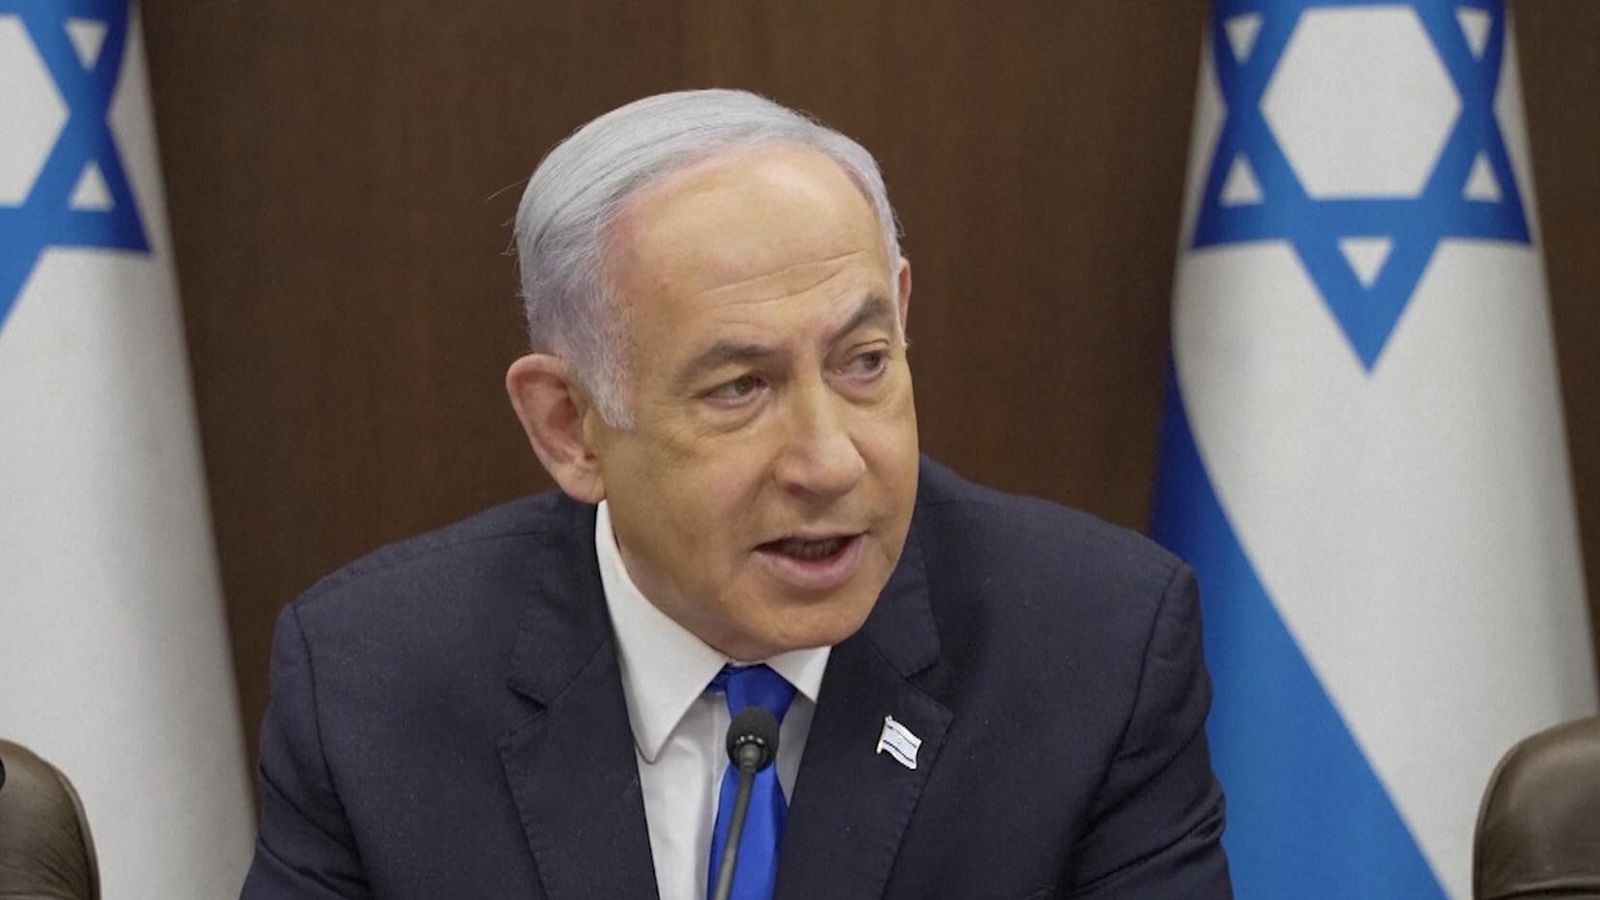 UK will not oppose right of ICC to issue arrest warrant for Israeli PM Netanyahu, says No 10